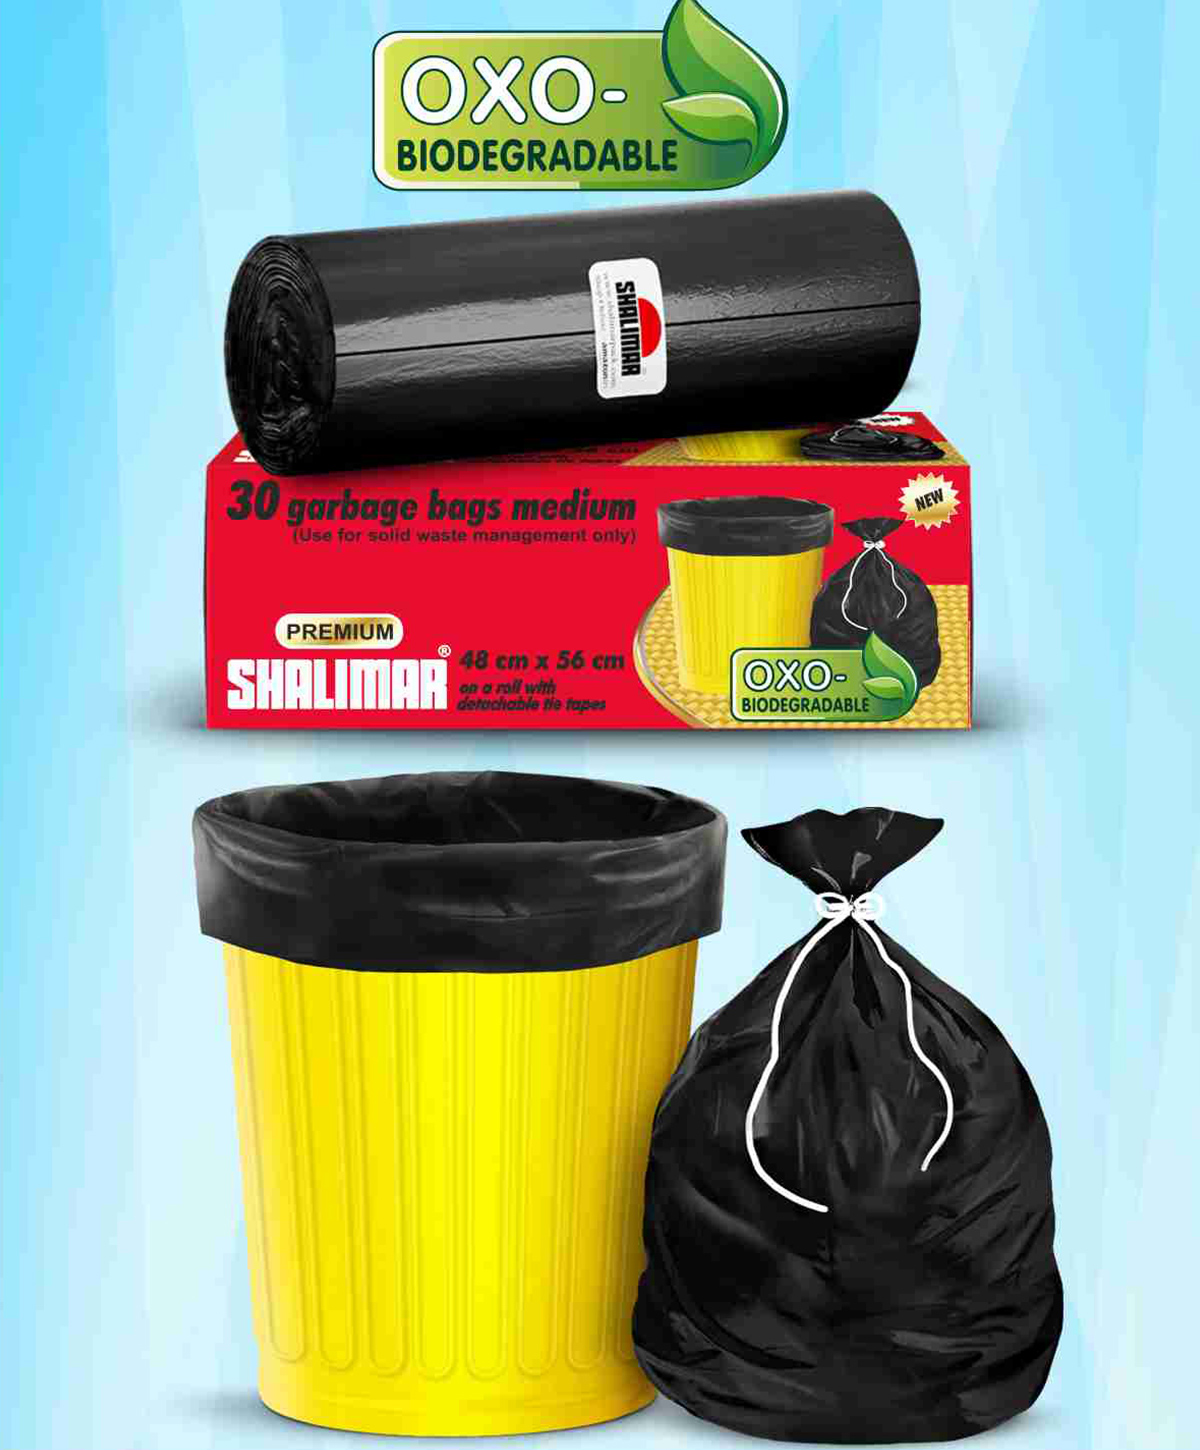 Combo, Oxo-Biodegradable Garbage Bags